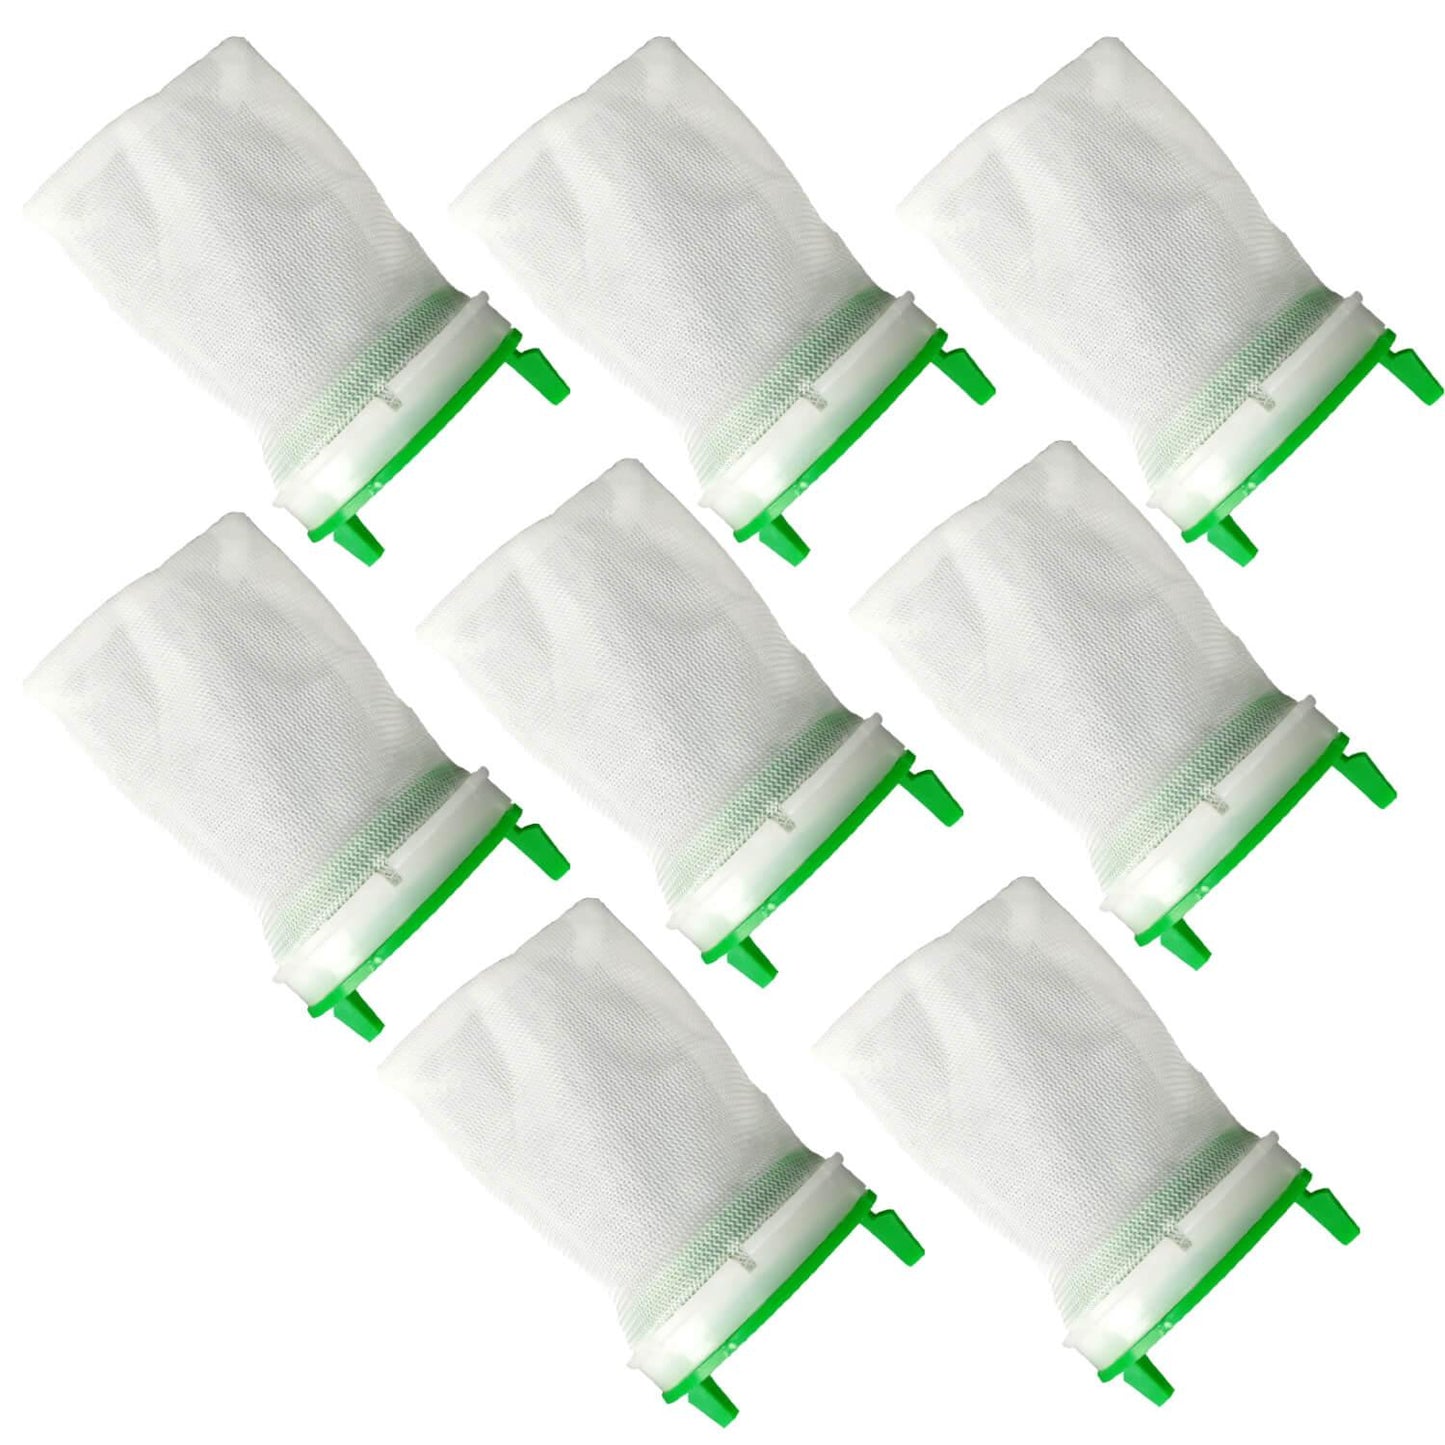 8 Washing Machine Lint Filter Bag For Simpson Ezi Set SWT604 SWT6041 Sparesbarn